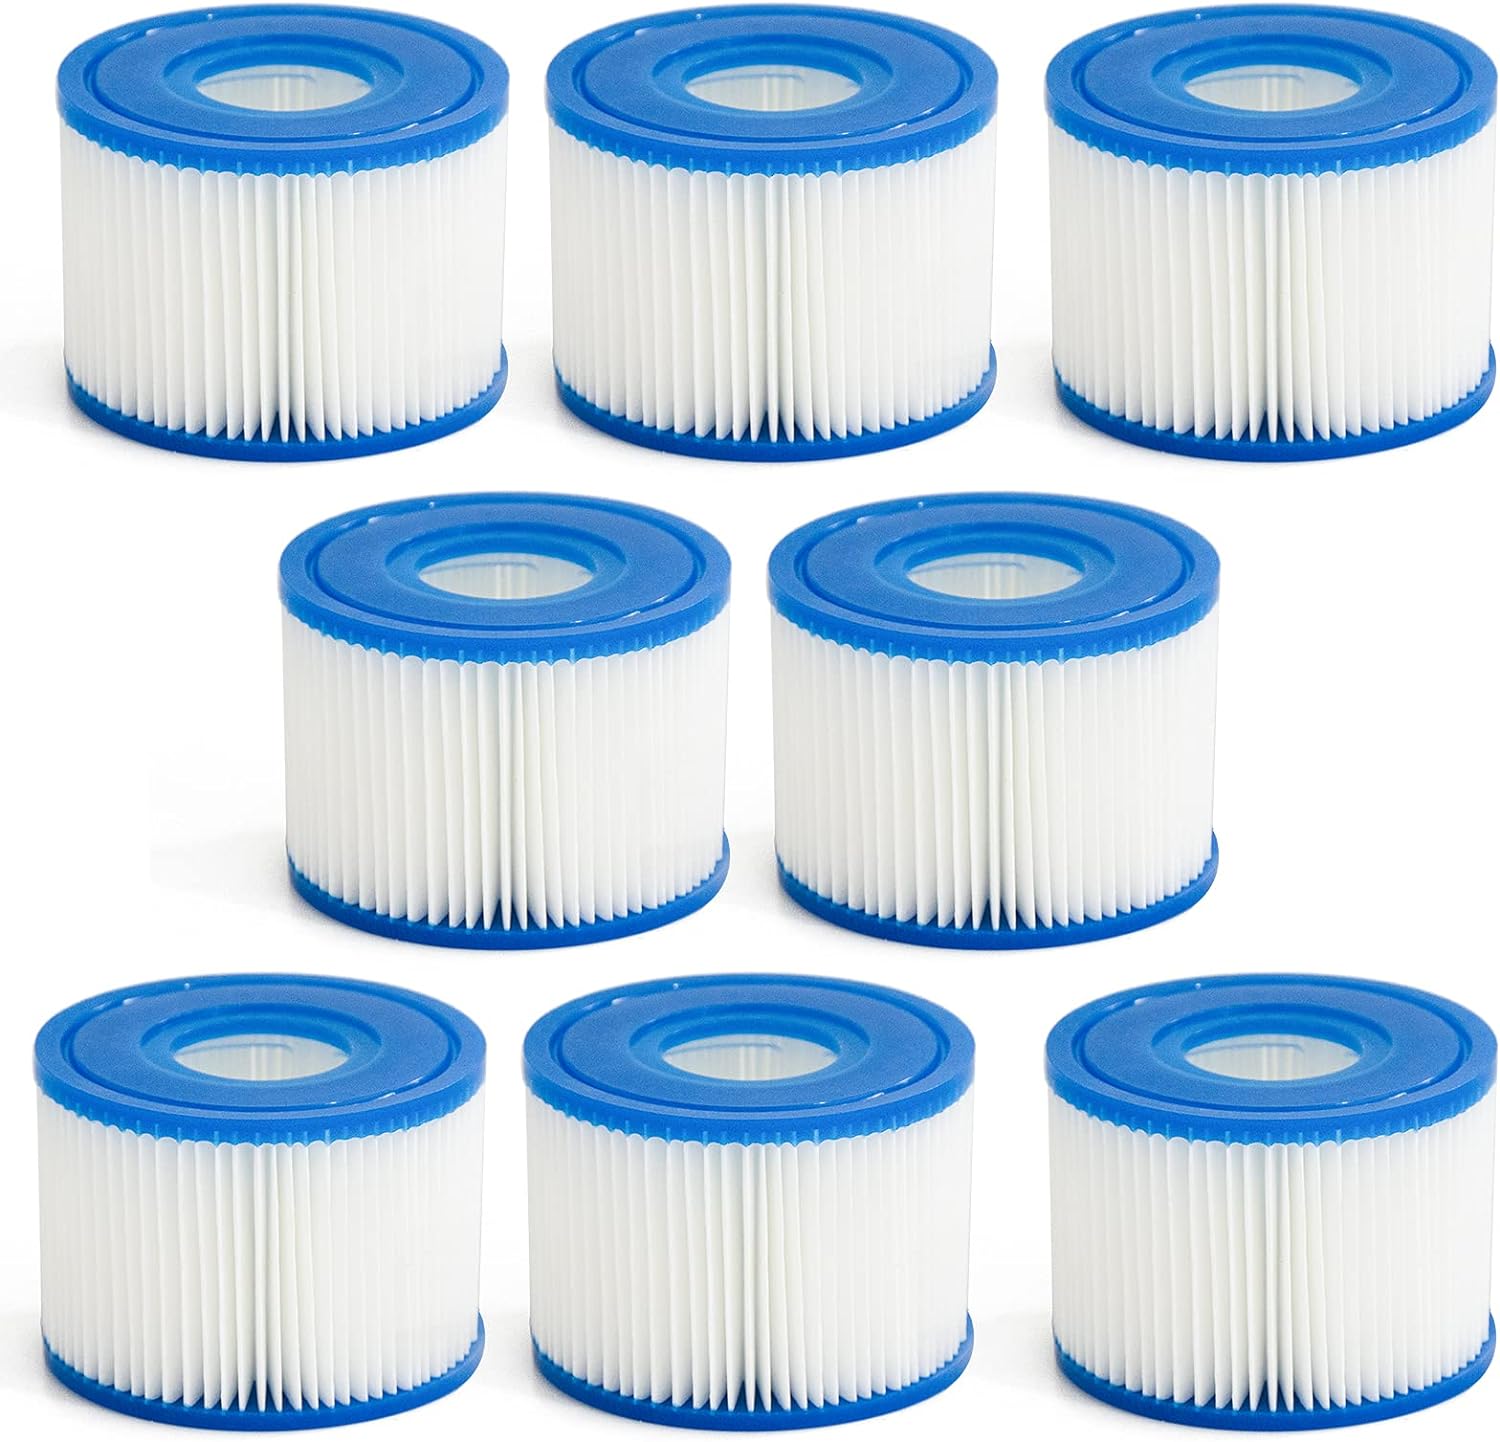 12-Pack Set Spa Hot Tub Filter Cartridge Pool Type S1 Replacement Easy To Clean 